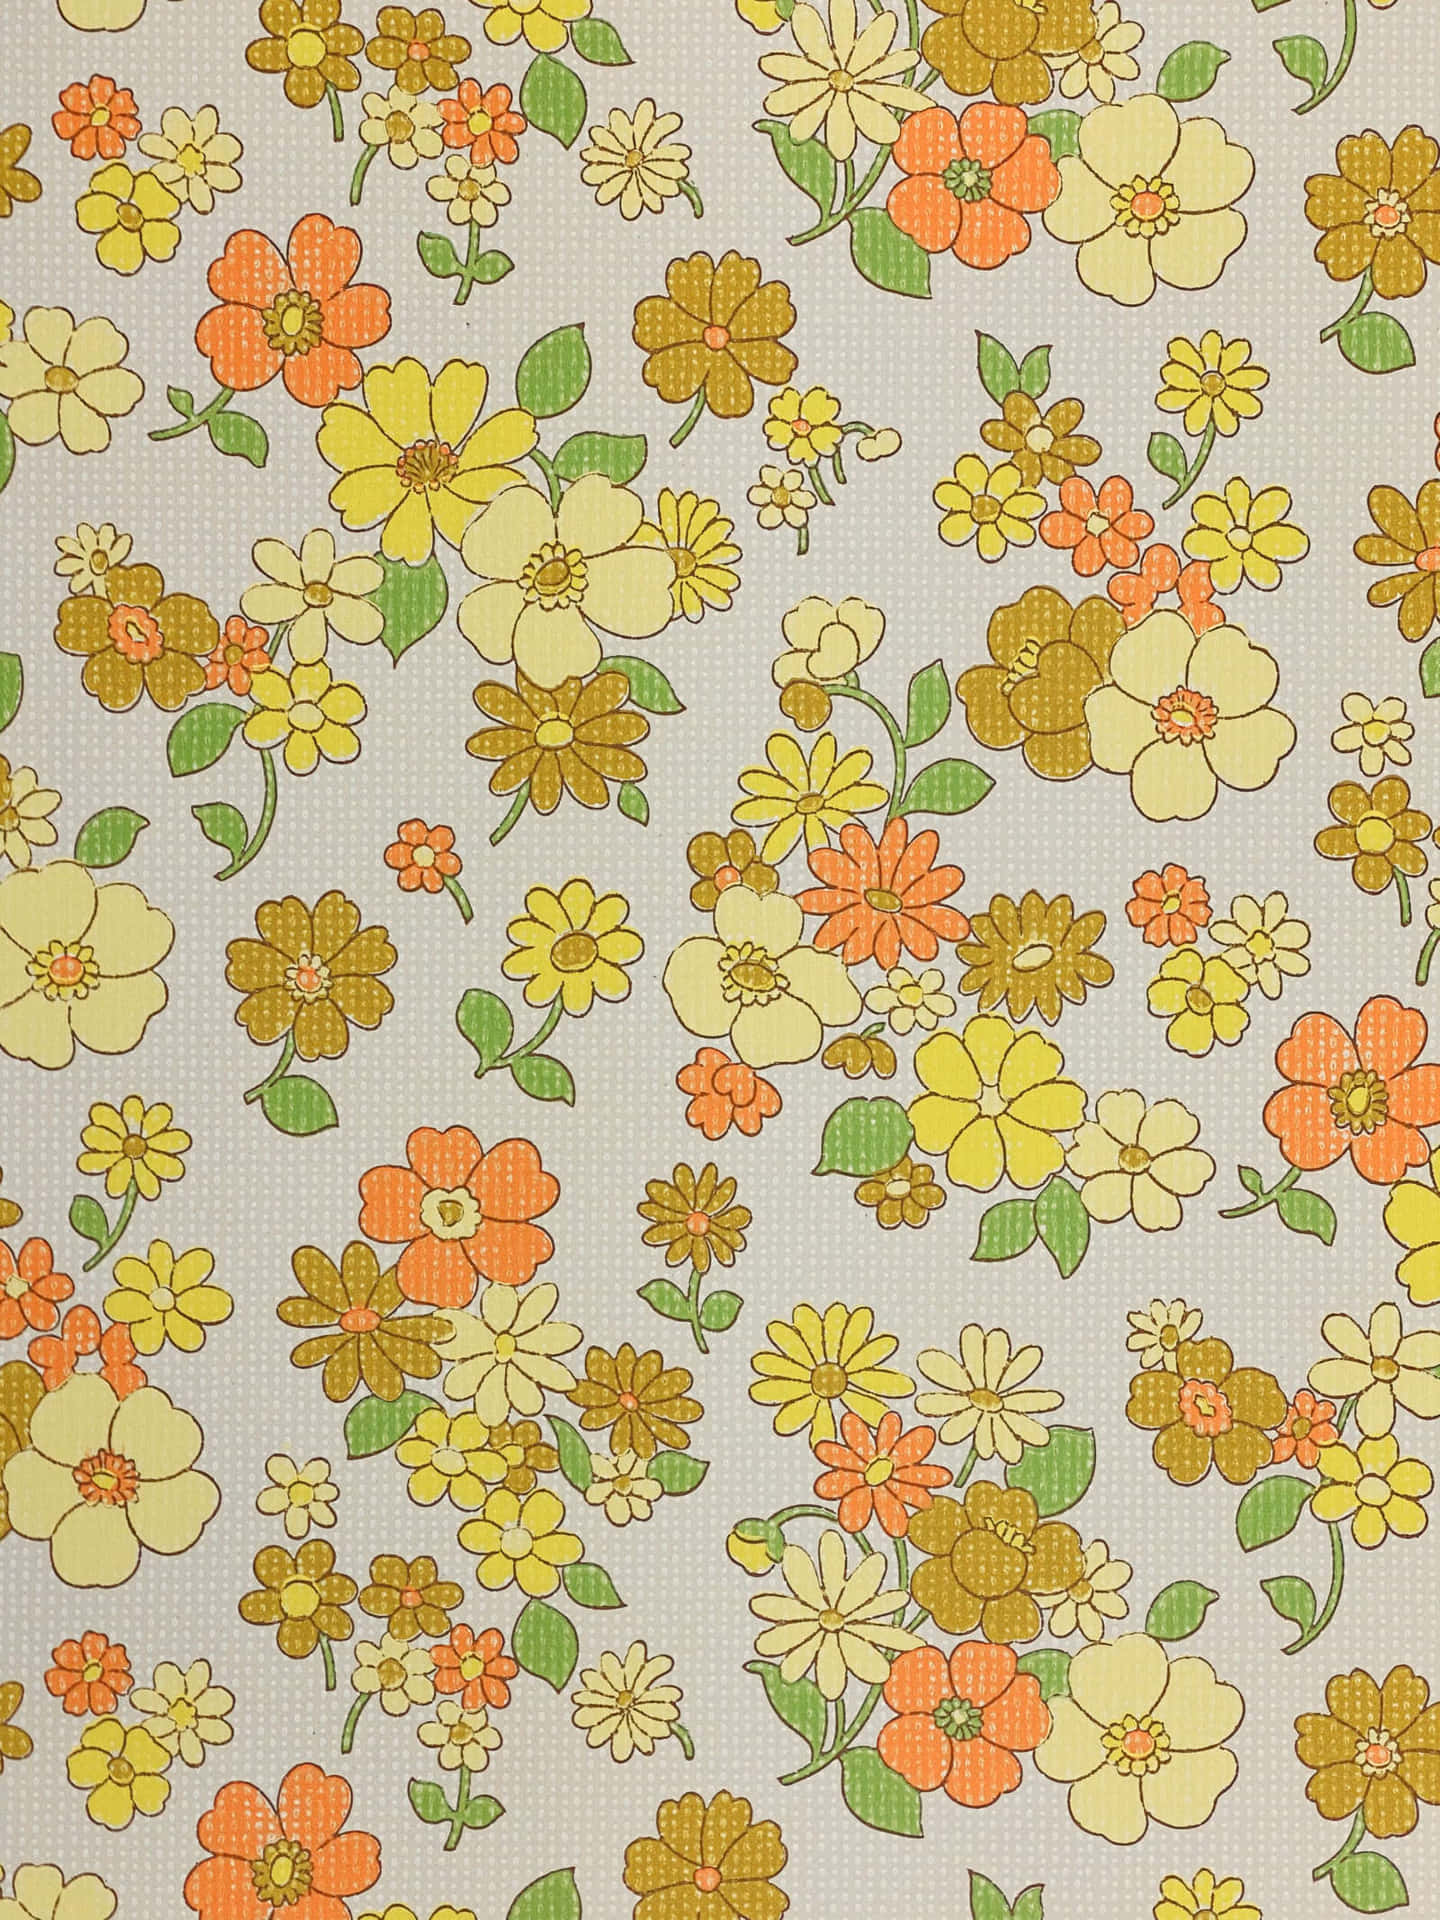 Premium Vector  70s retro flower vector seamless pattern groovy vintage  floral repeat pattern with flowers simple shapeswavy geometric floral  hippie print for wallpaperbanner fabric wrappingabstract background